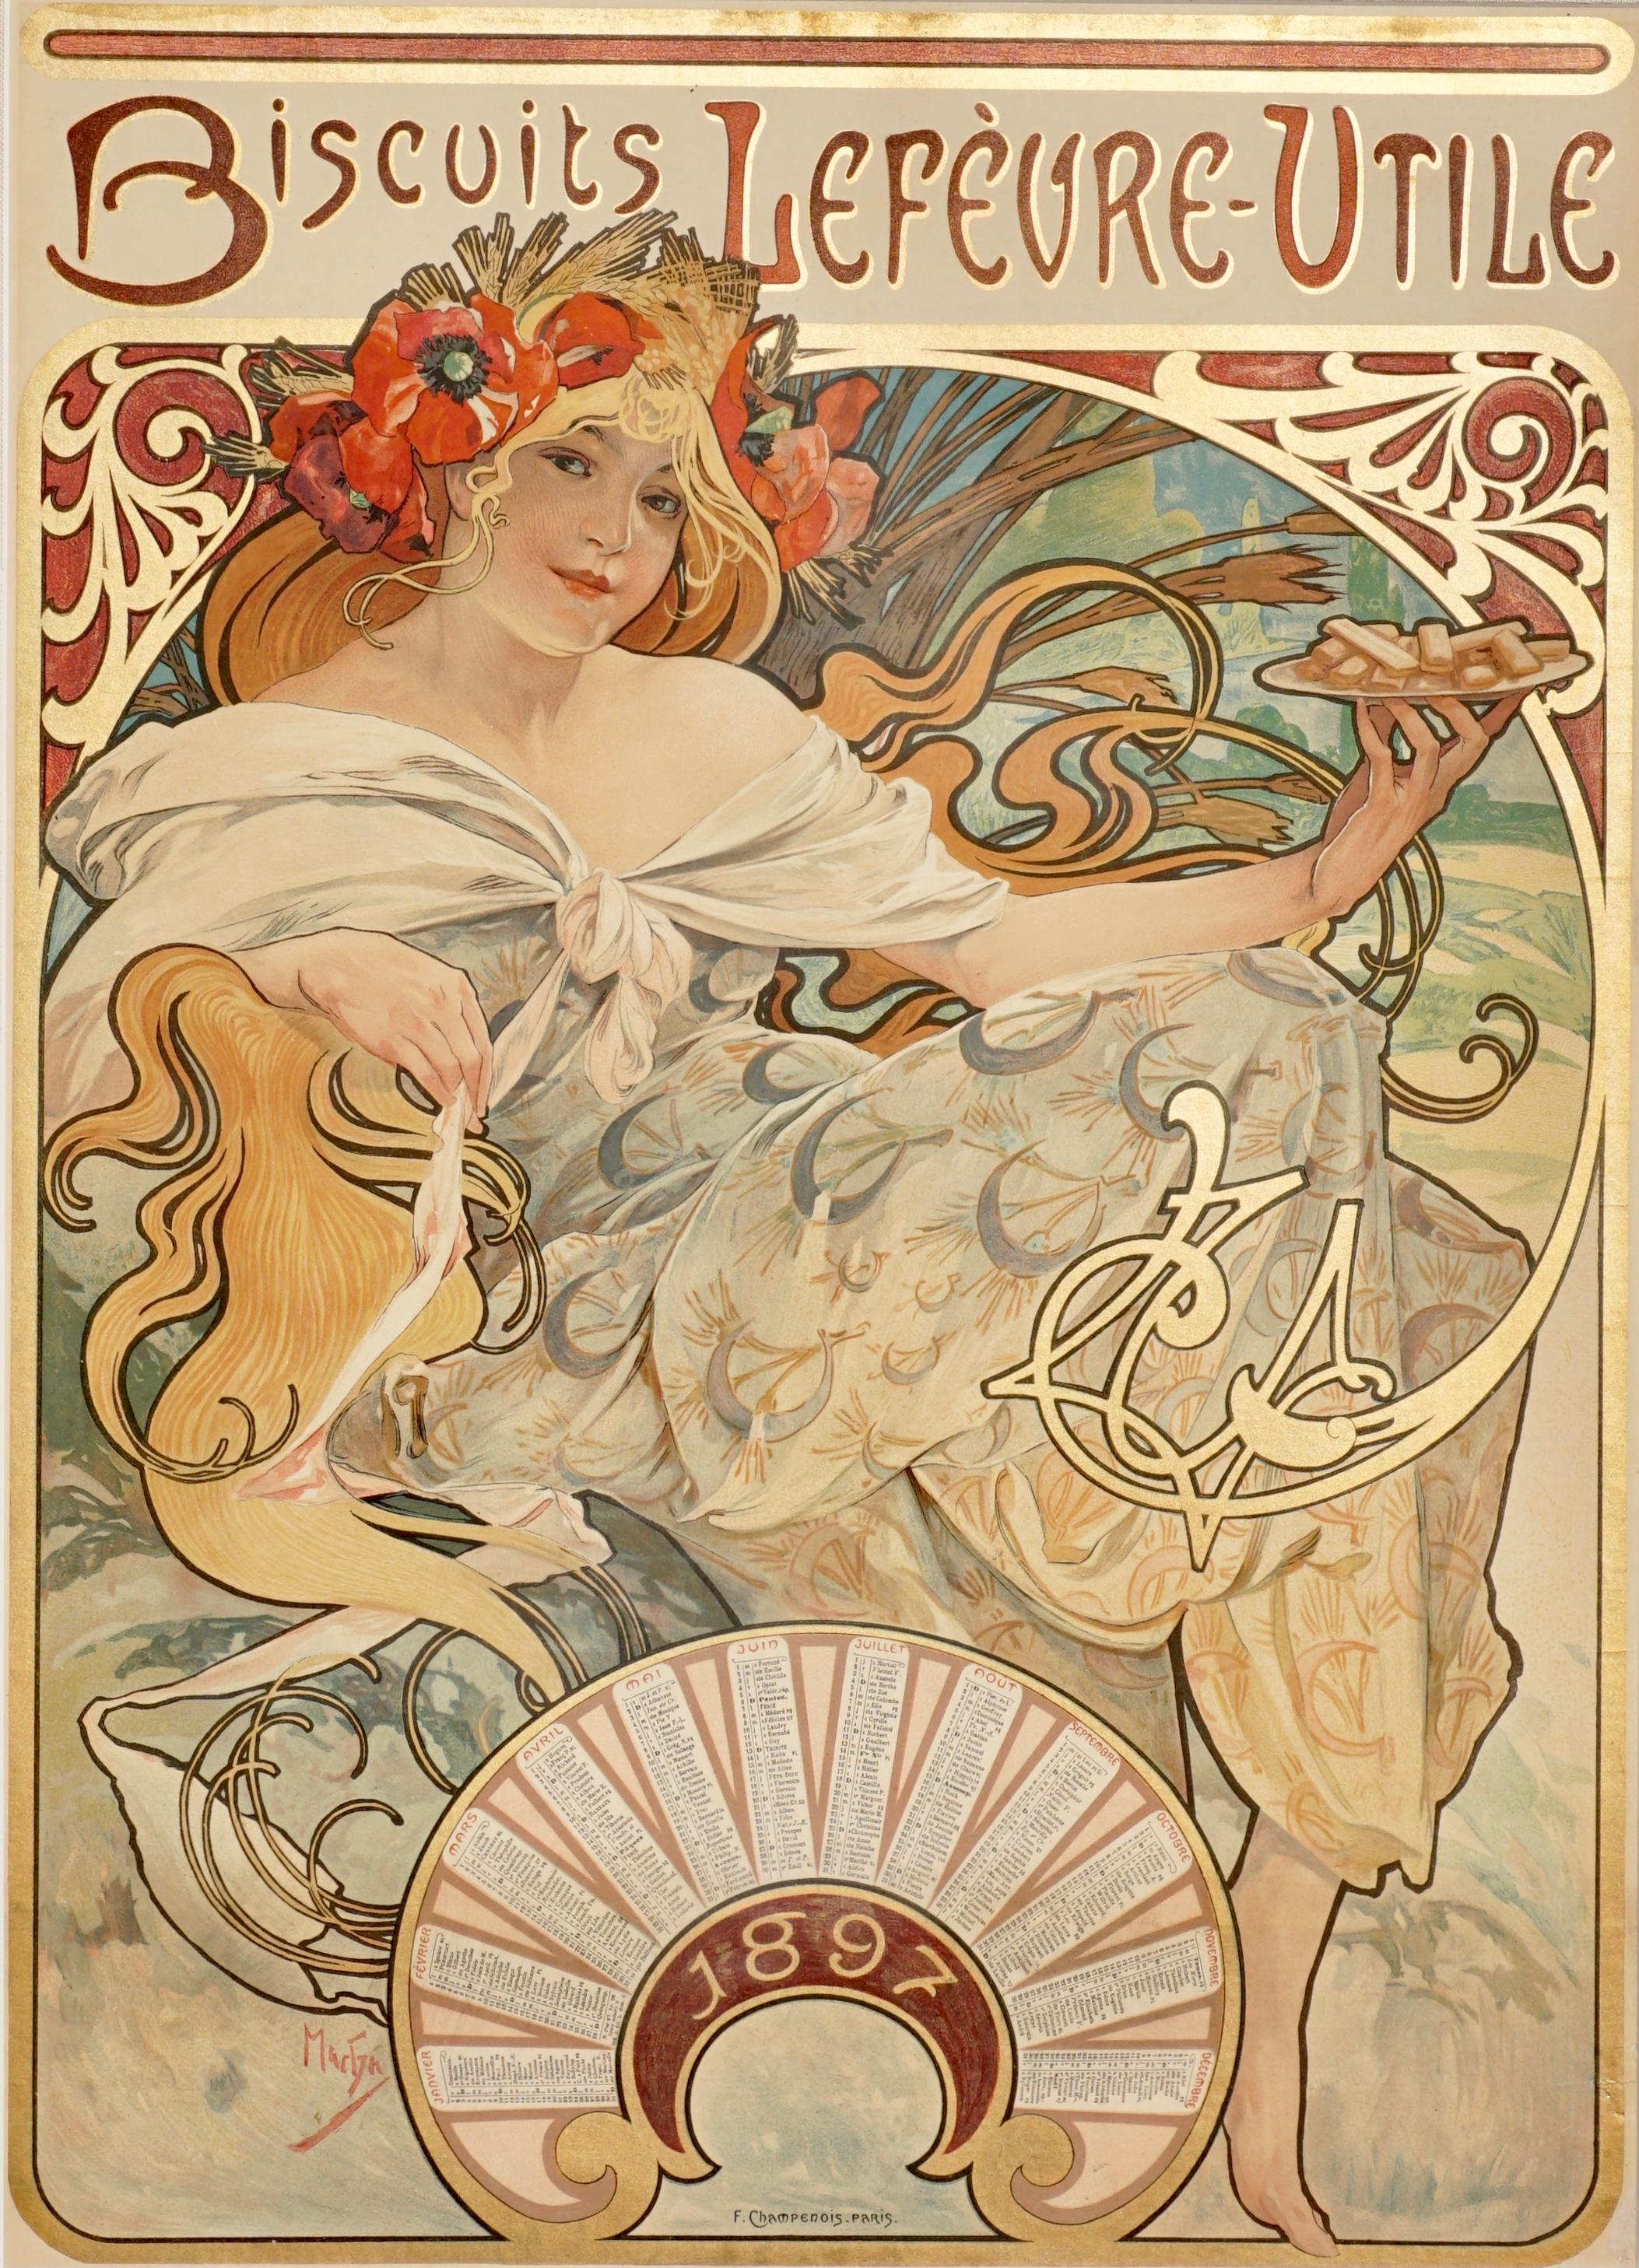 Alphonse Mucha Art Nouveau, 1897 Poster printed by F. Chapmenois Paris. France. Vivid and vibrant colors.

Museum archival glass, silk mat and frame ready to hang. Poster is linen backed. One .5 inches tare on right bottom border. Very good